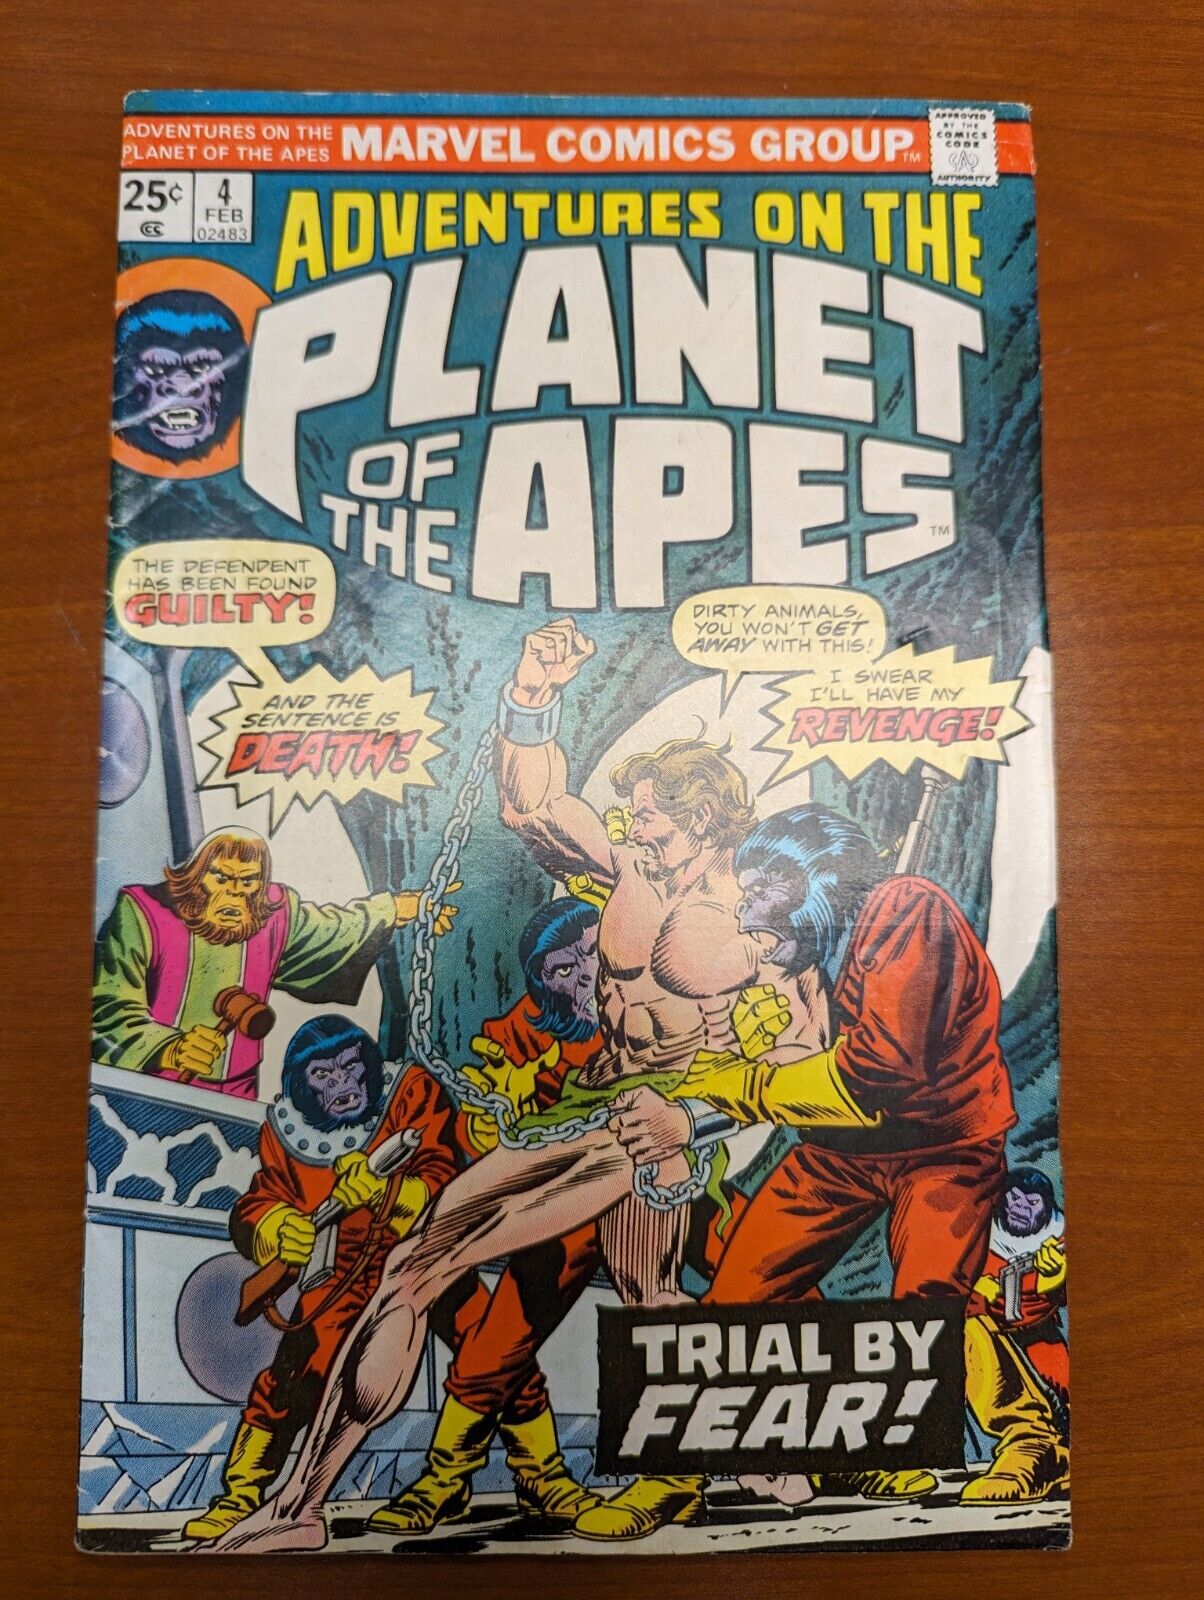 Adventures on The Panet of the Apes #4 VG+/F - 2/76 movie adaptation - Clean 